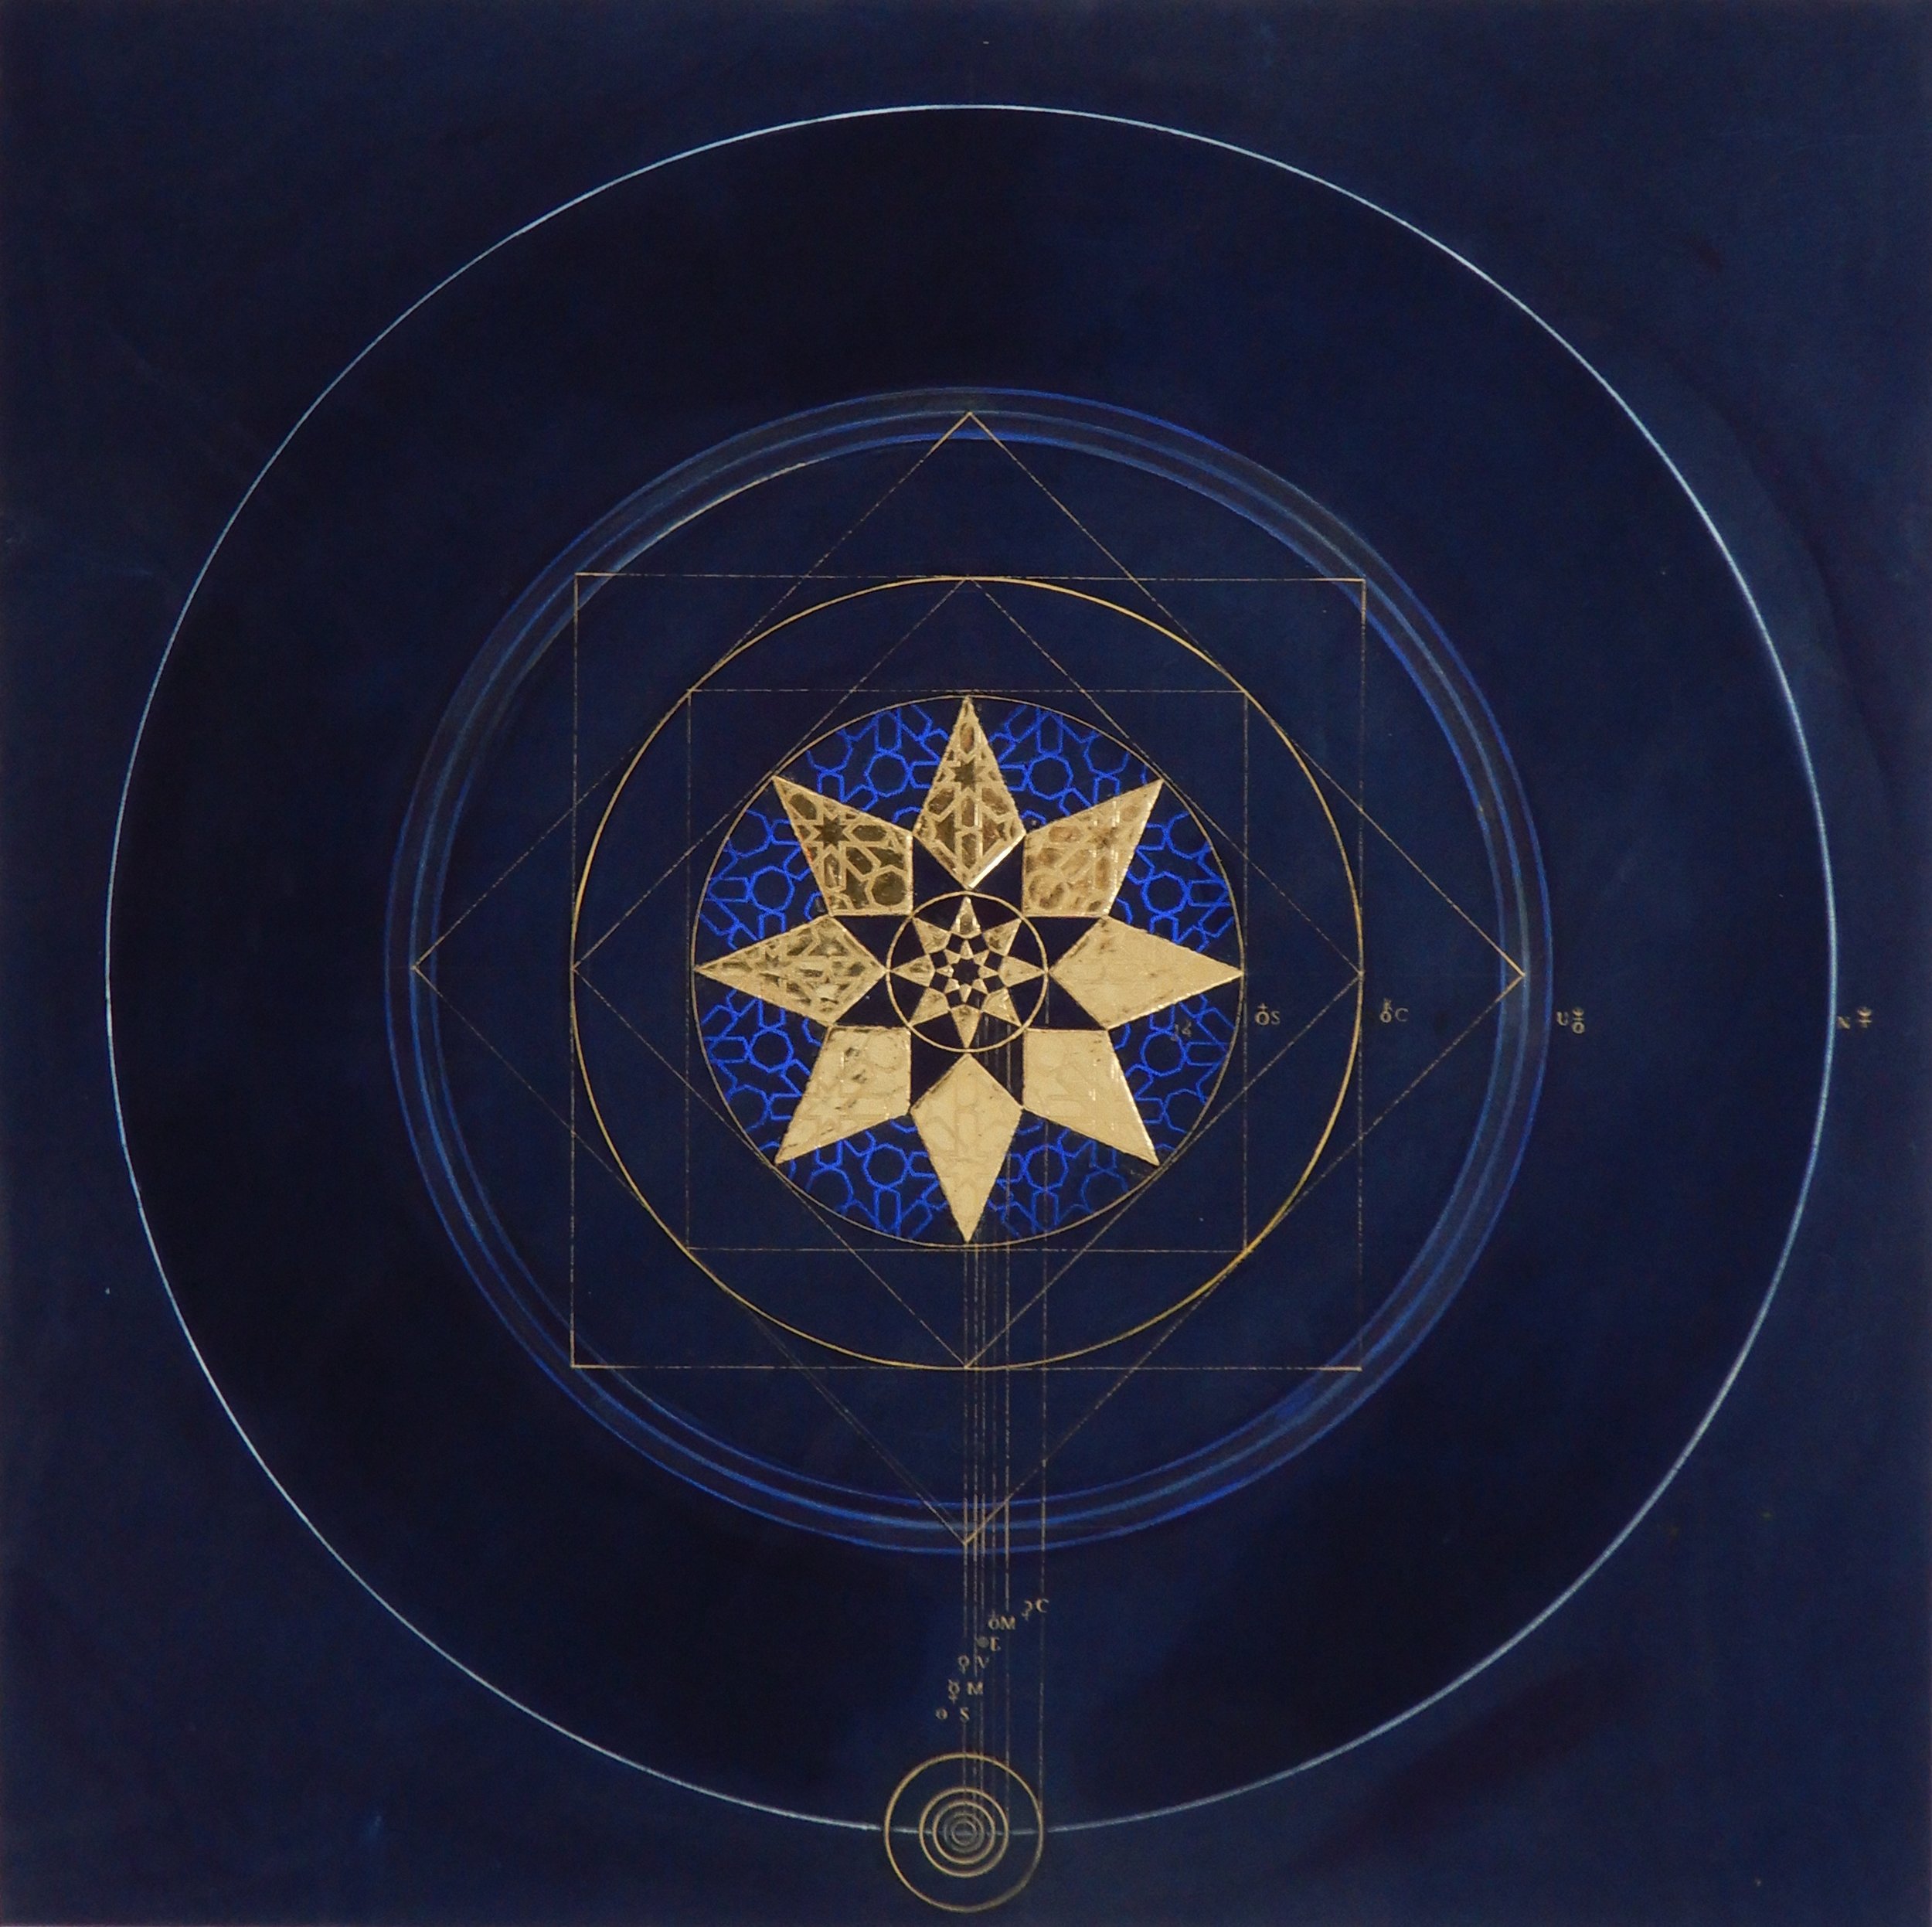   DESMOND LAZARO   The orbits of the nine planets including Ceres &amp; Chiron after JM study  2022   Pigment paint and raised gold gilt on Indigo dyed cotton cloth attached to Birch board support  91 x 91 cm 